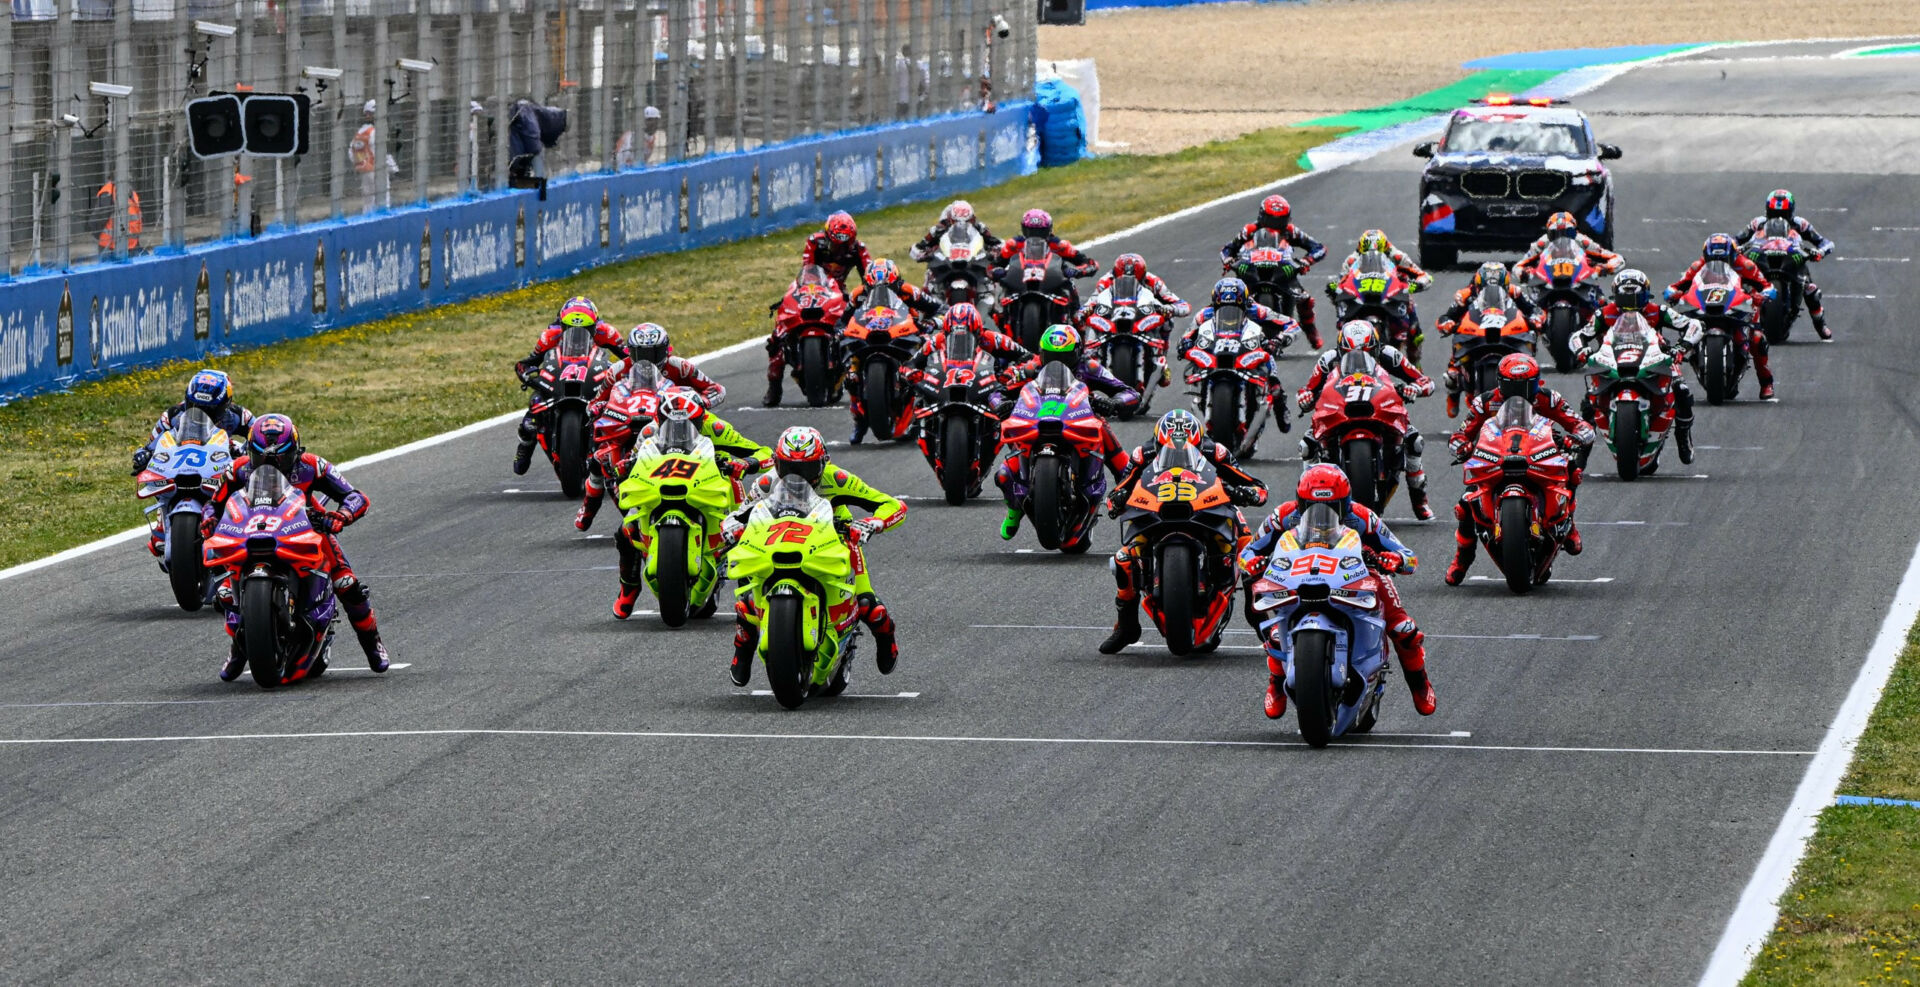 Dorna has announced sweeping changes to make MotoGP safer and more sustainable starting in 2027. Photo courtesy Dorna.